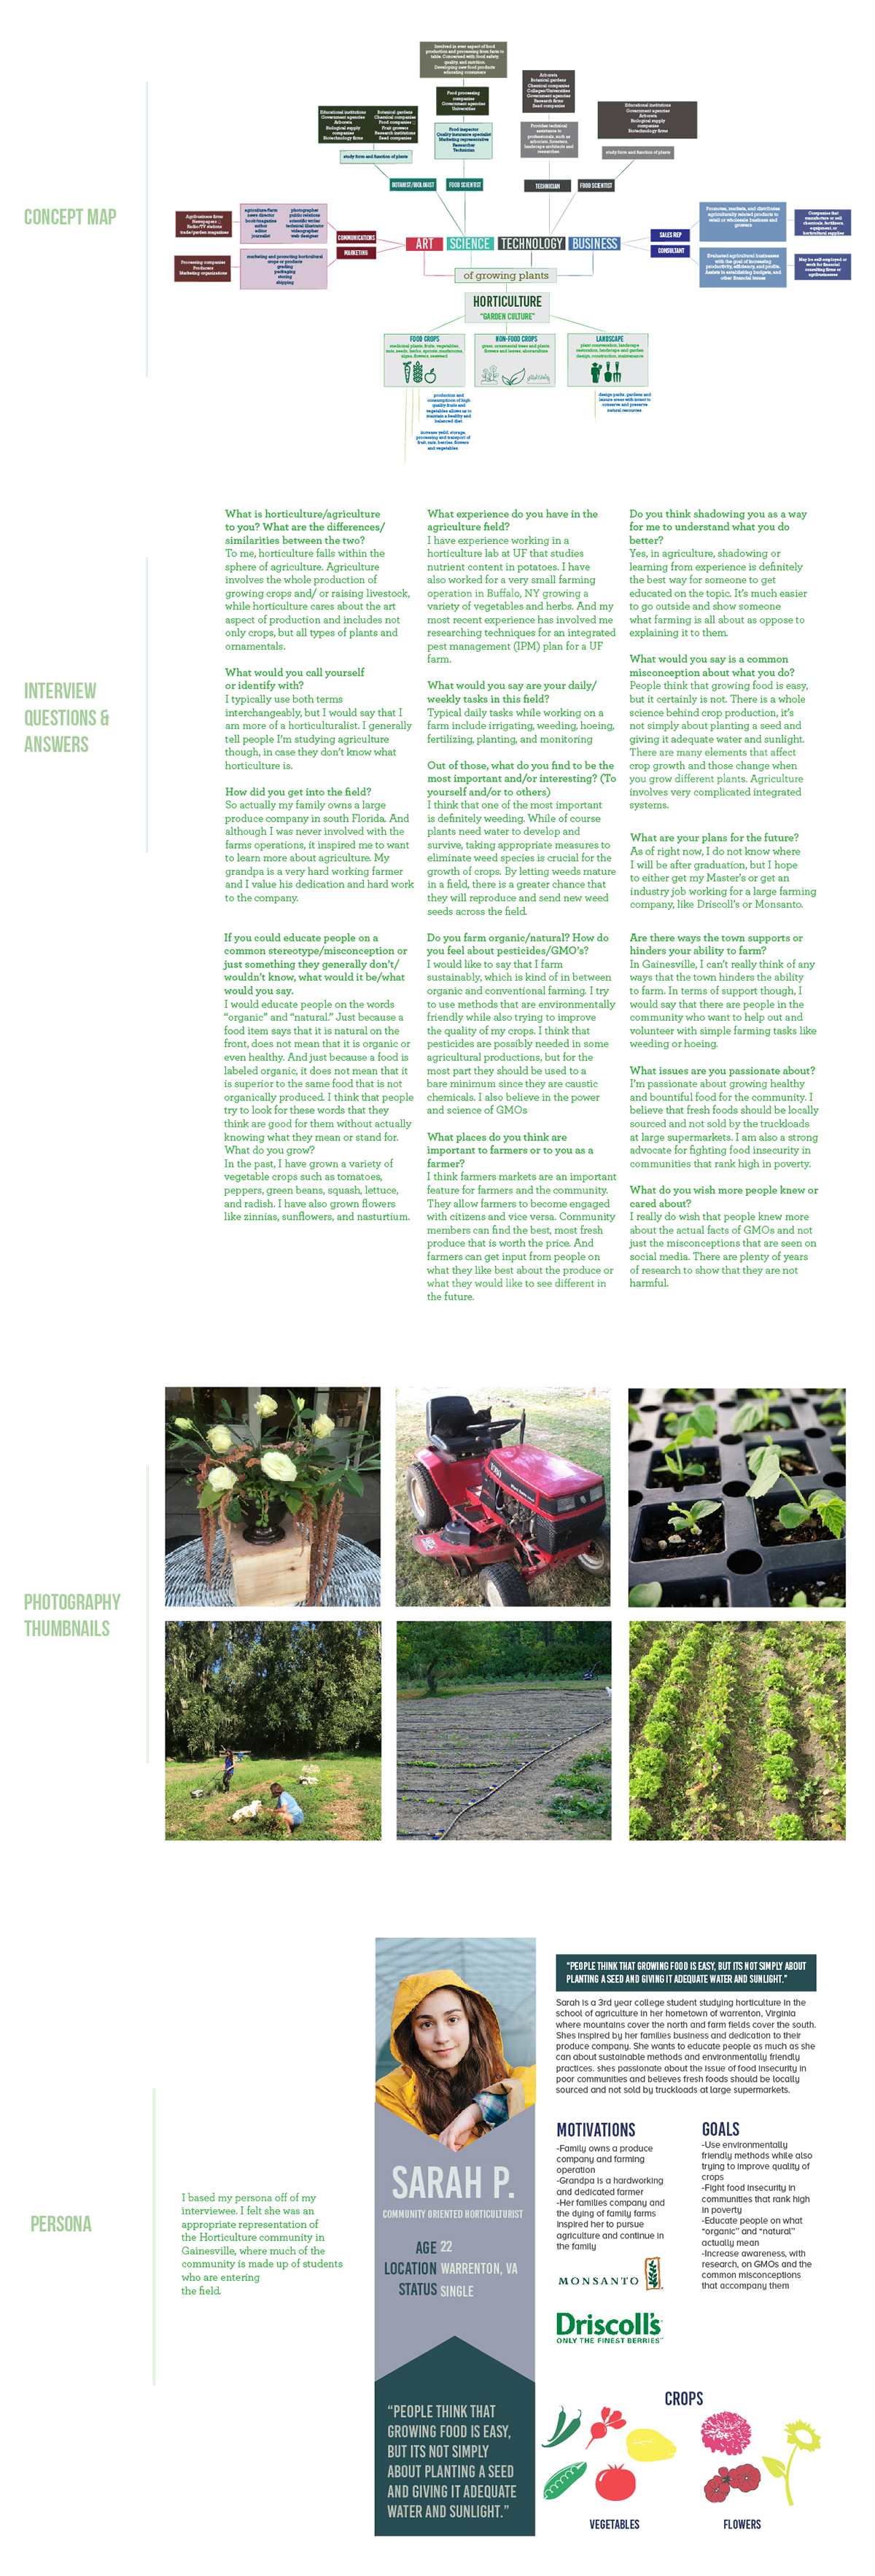 horticulture research info design infographic